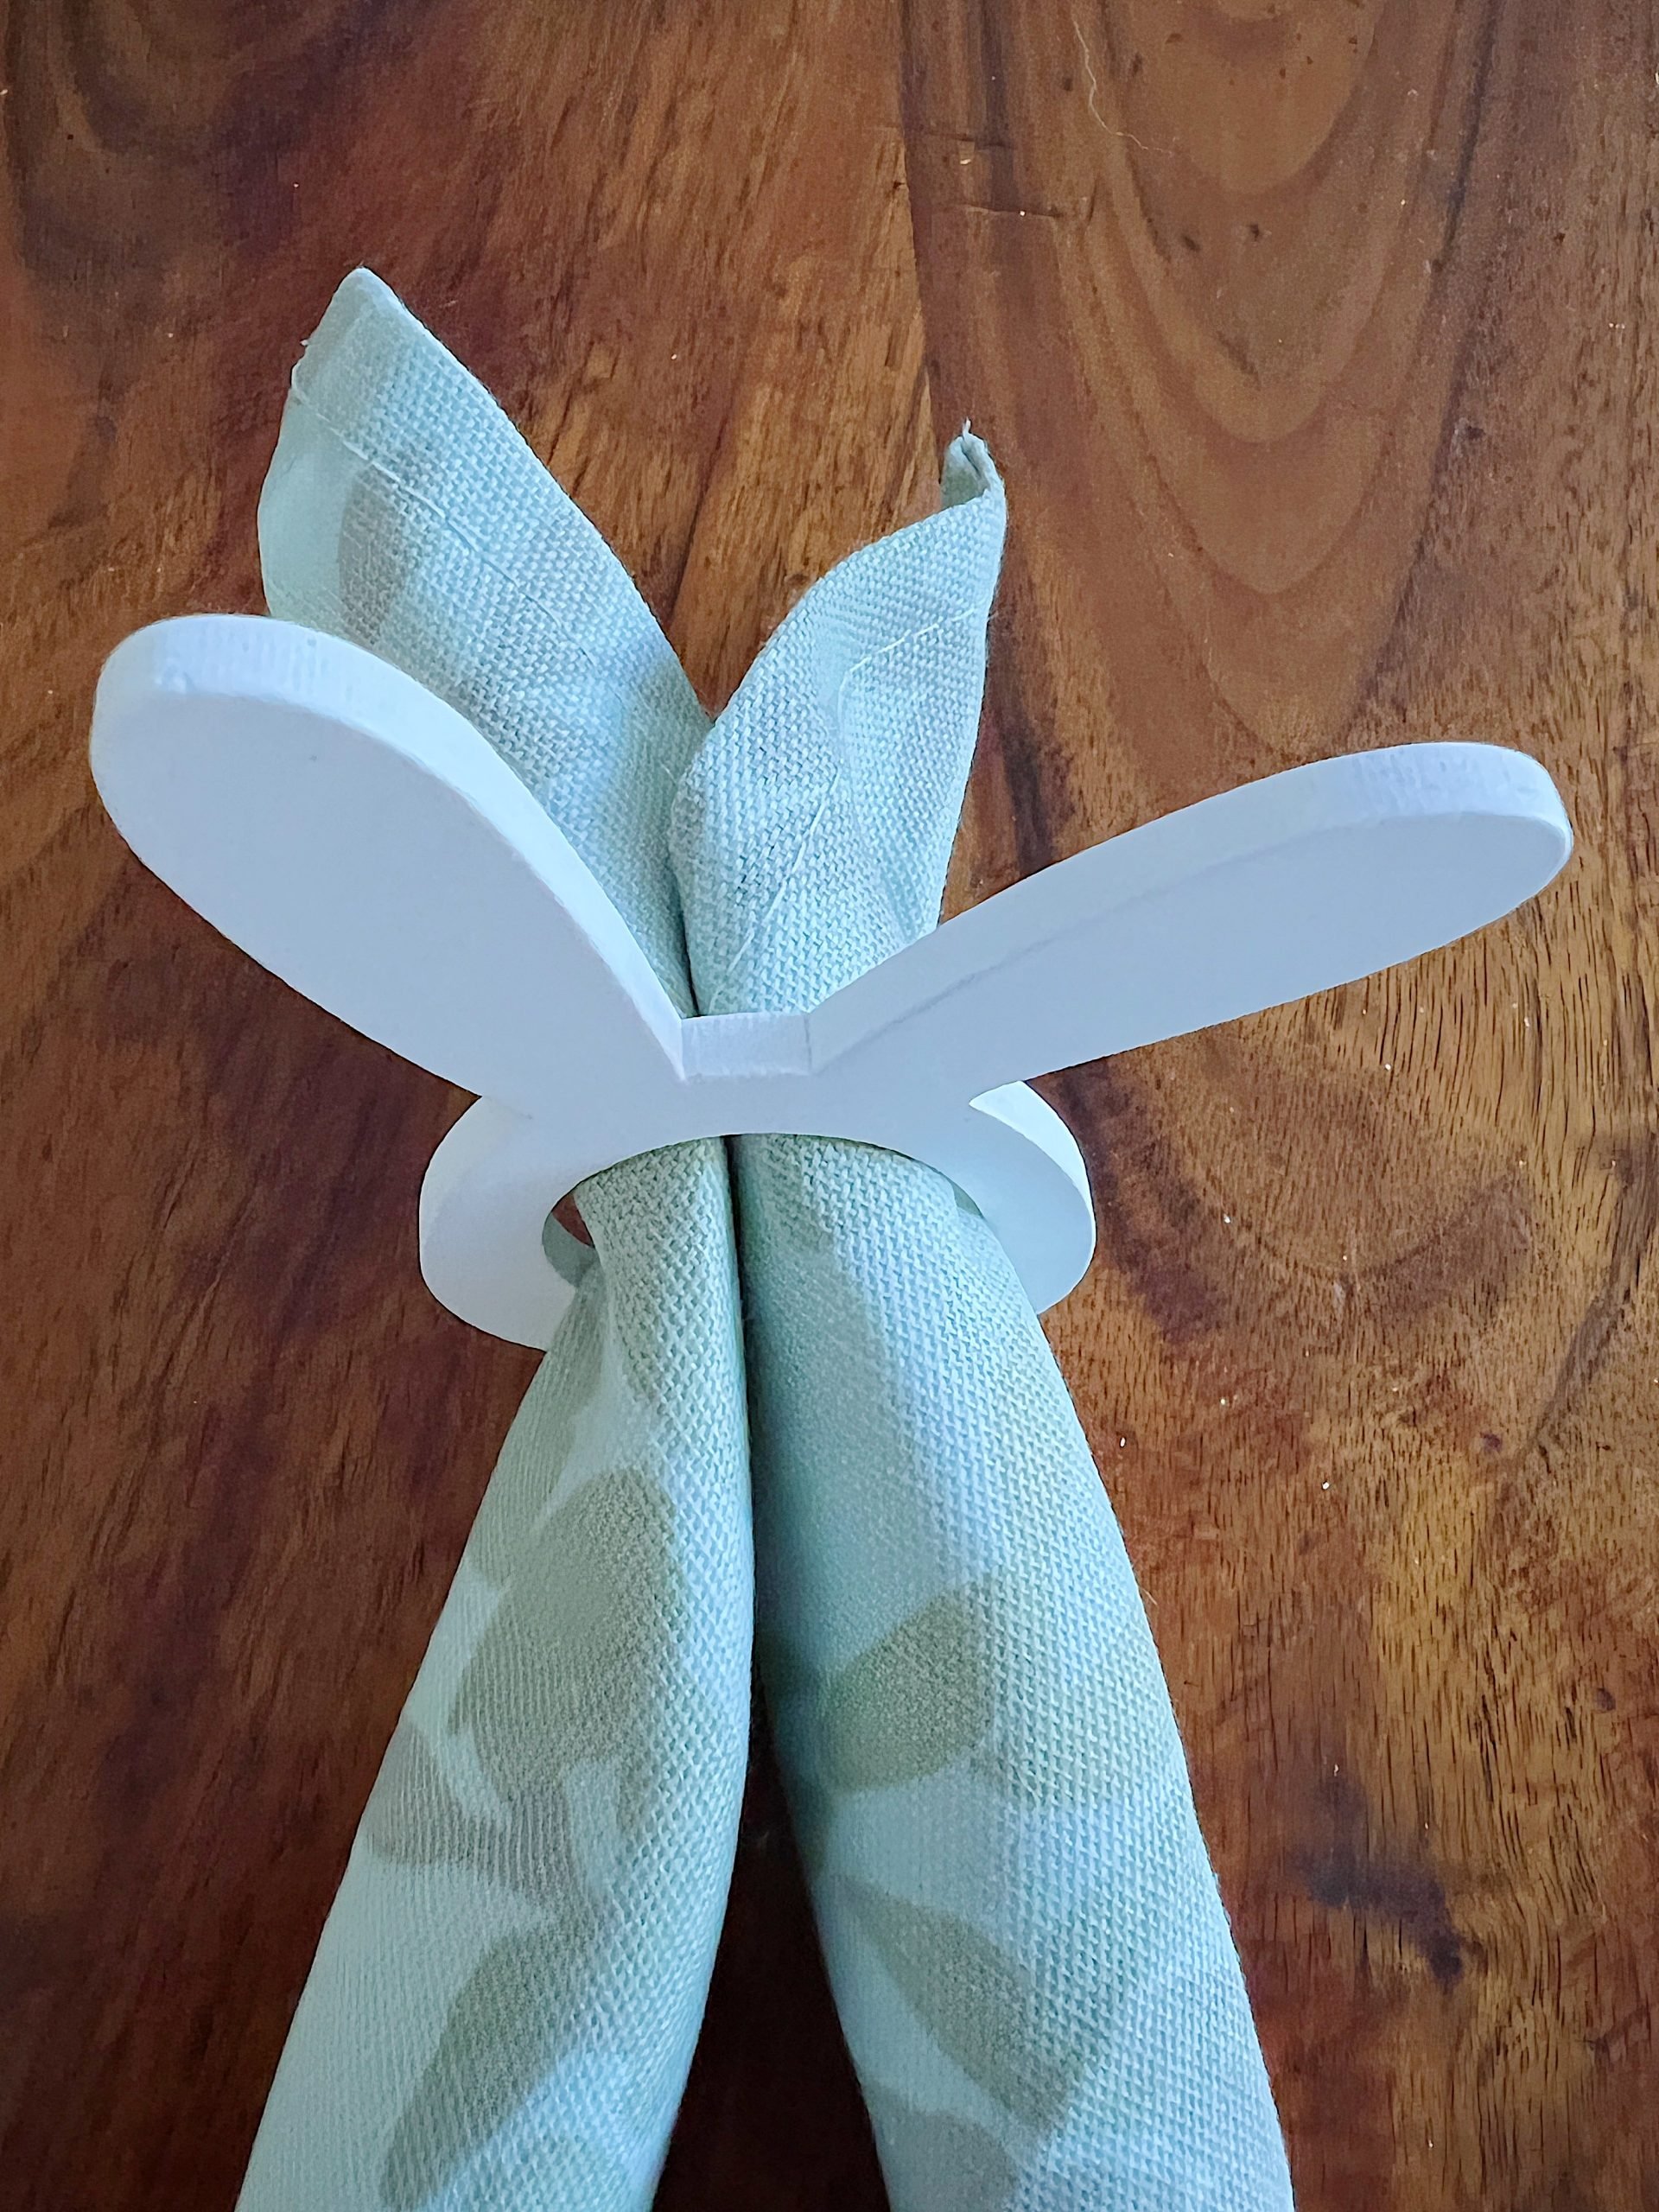 How to Fold Napkins with Rings